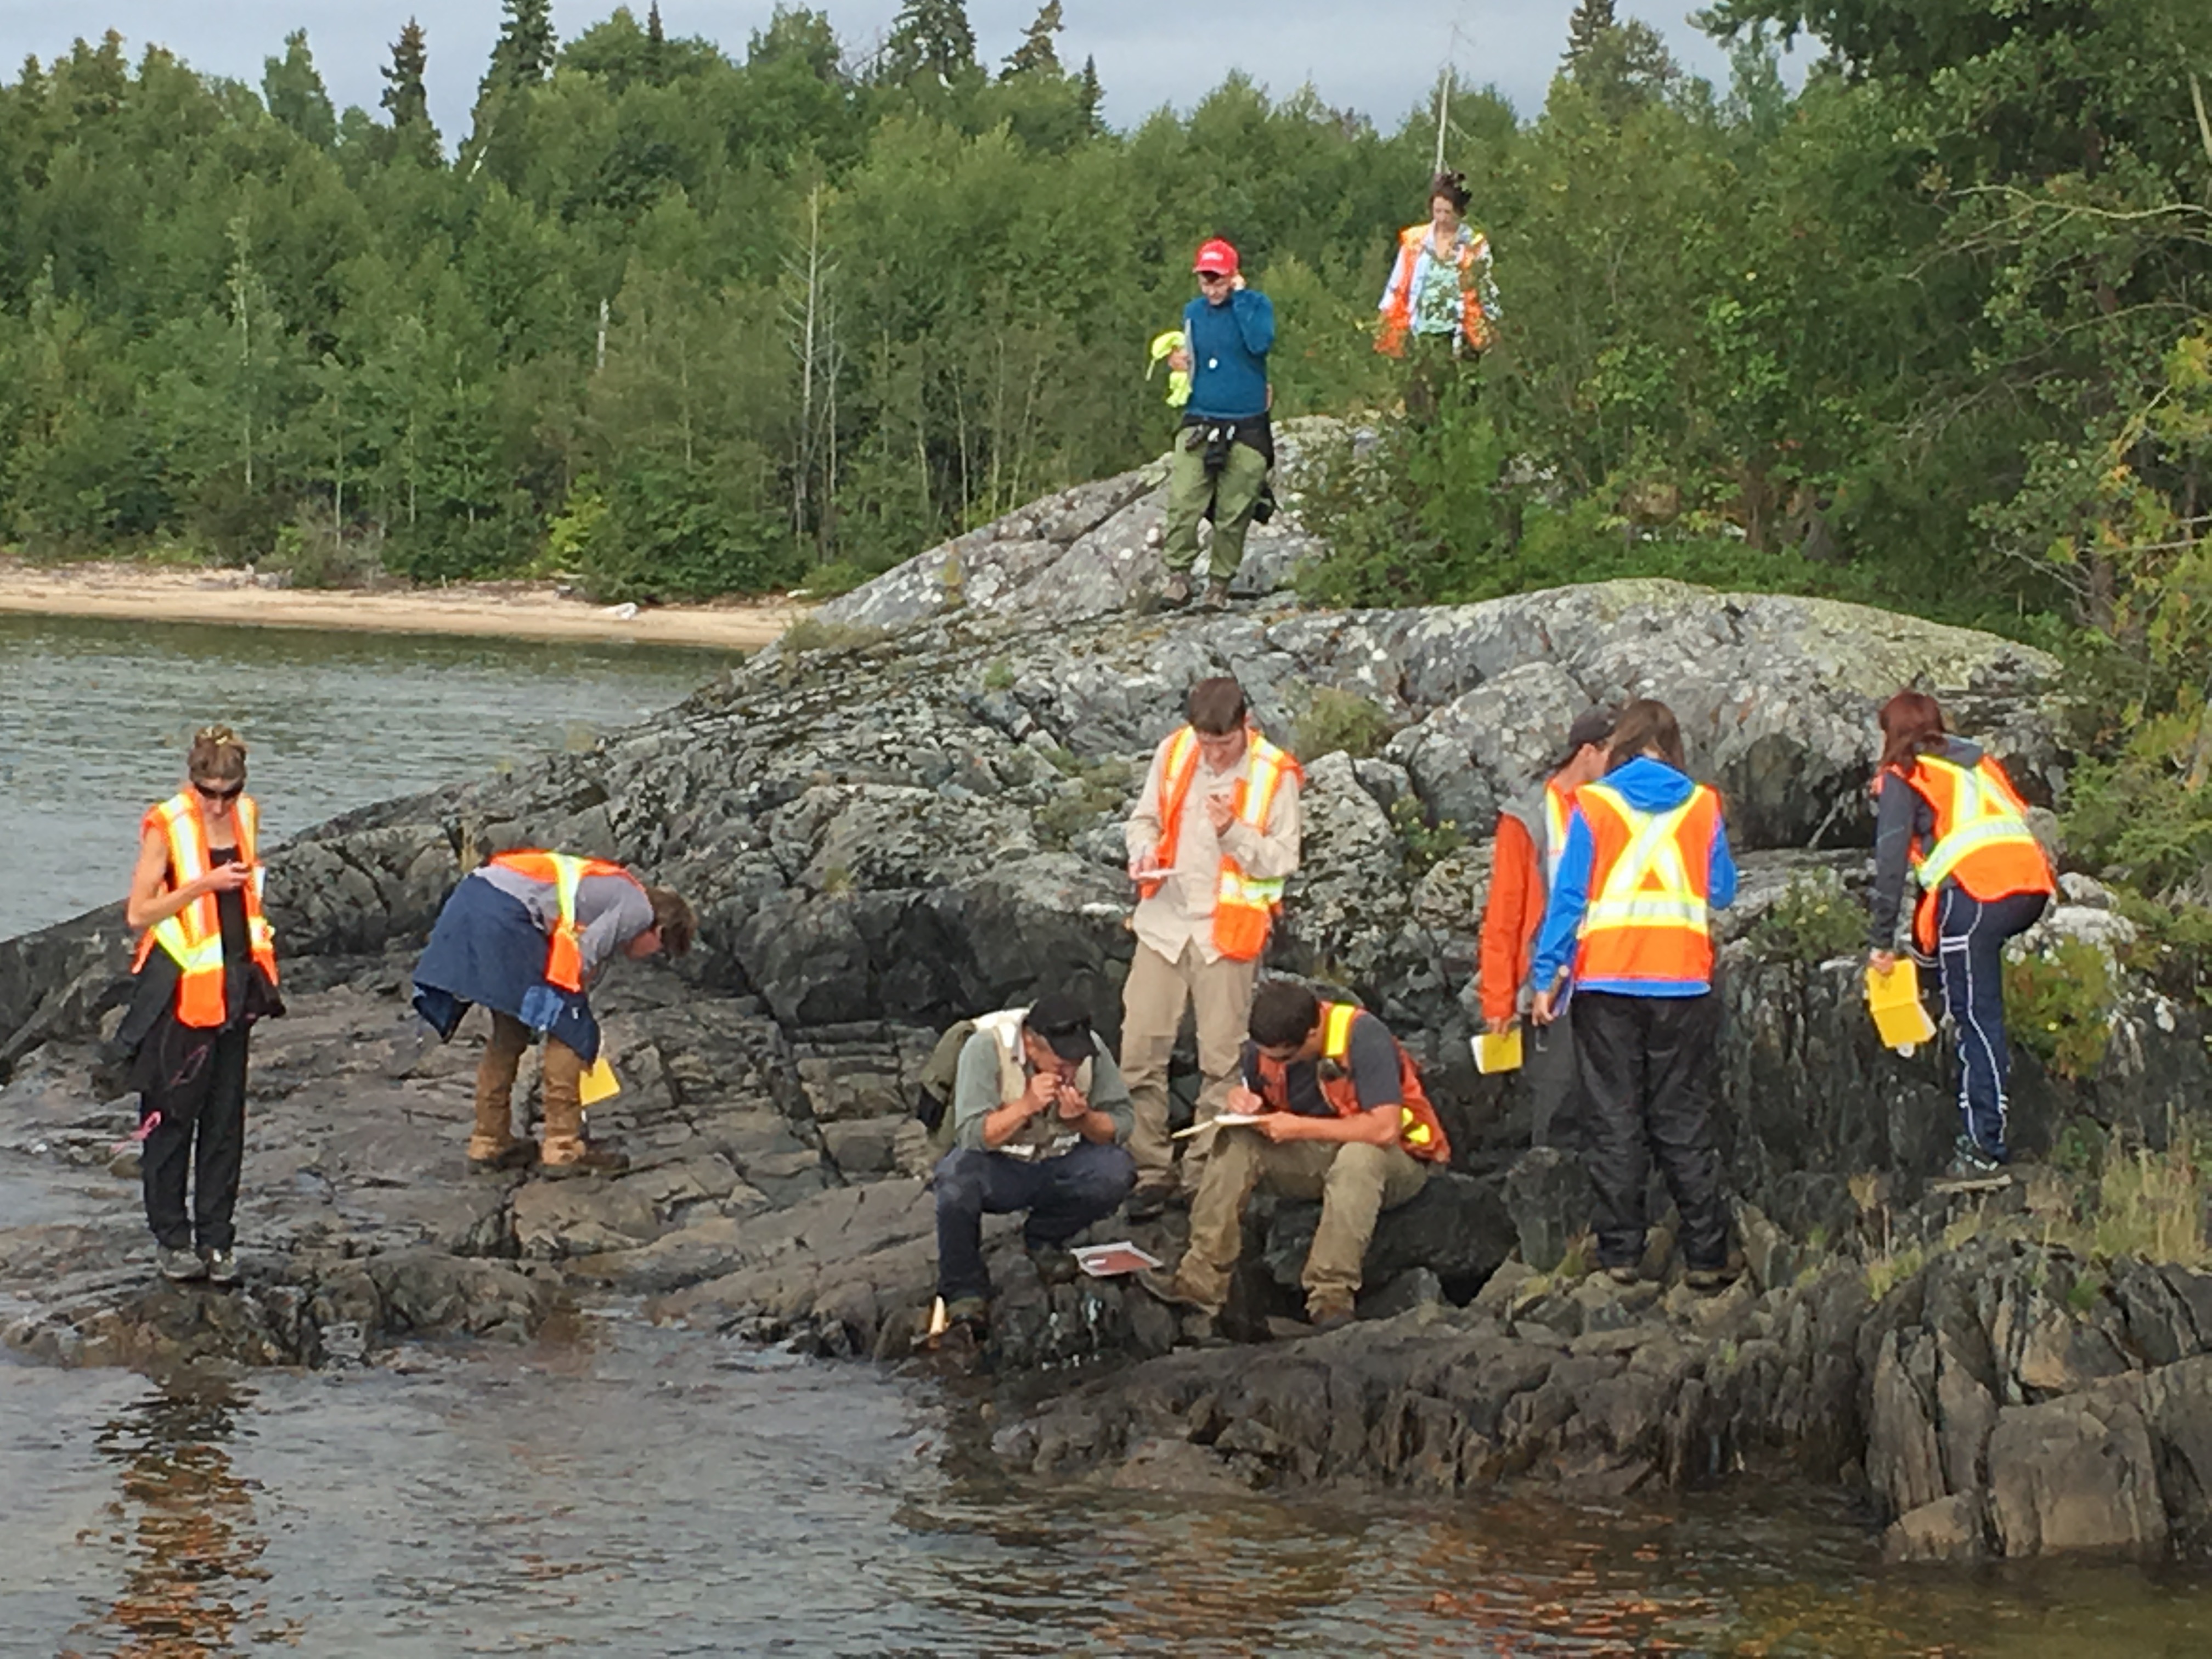 Lakehead geology students in reflective vests on a rocky outcropping beside water body